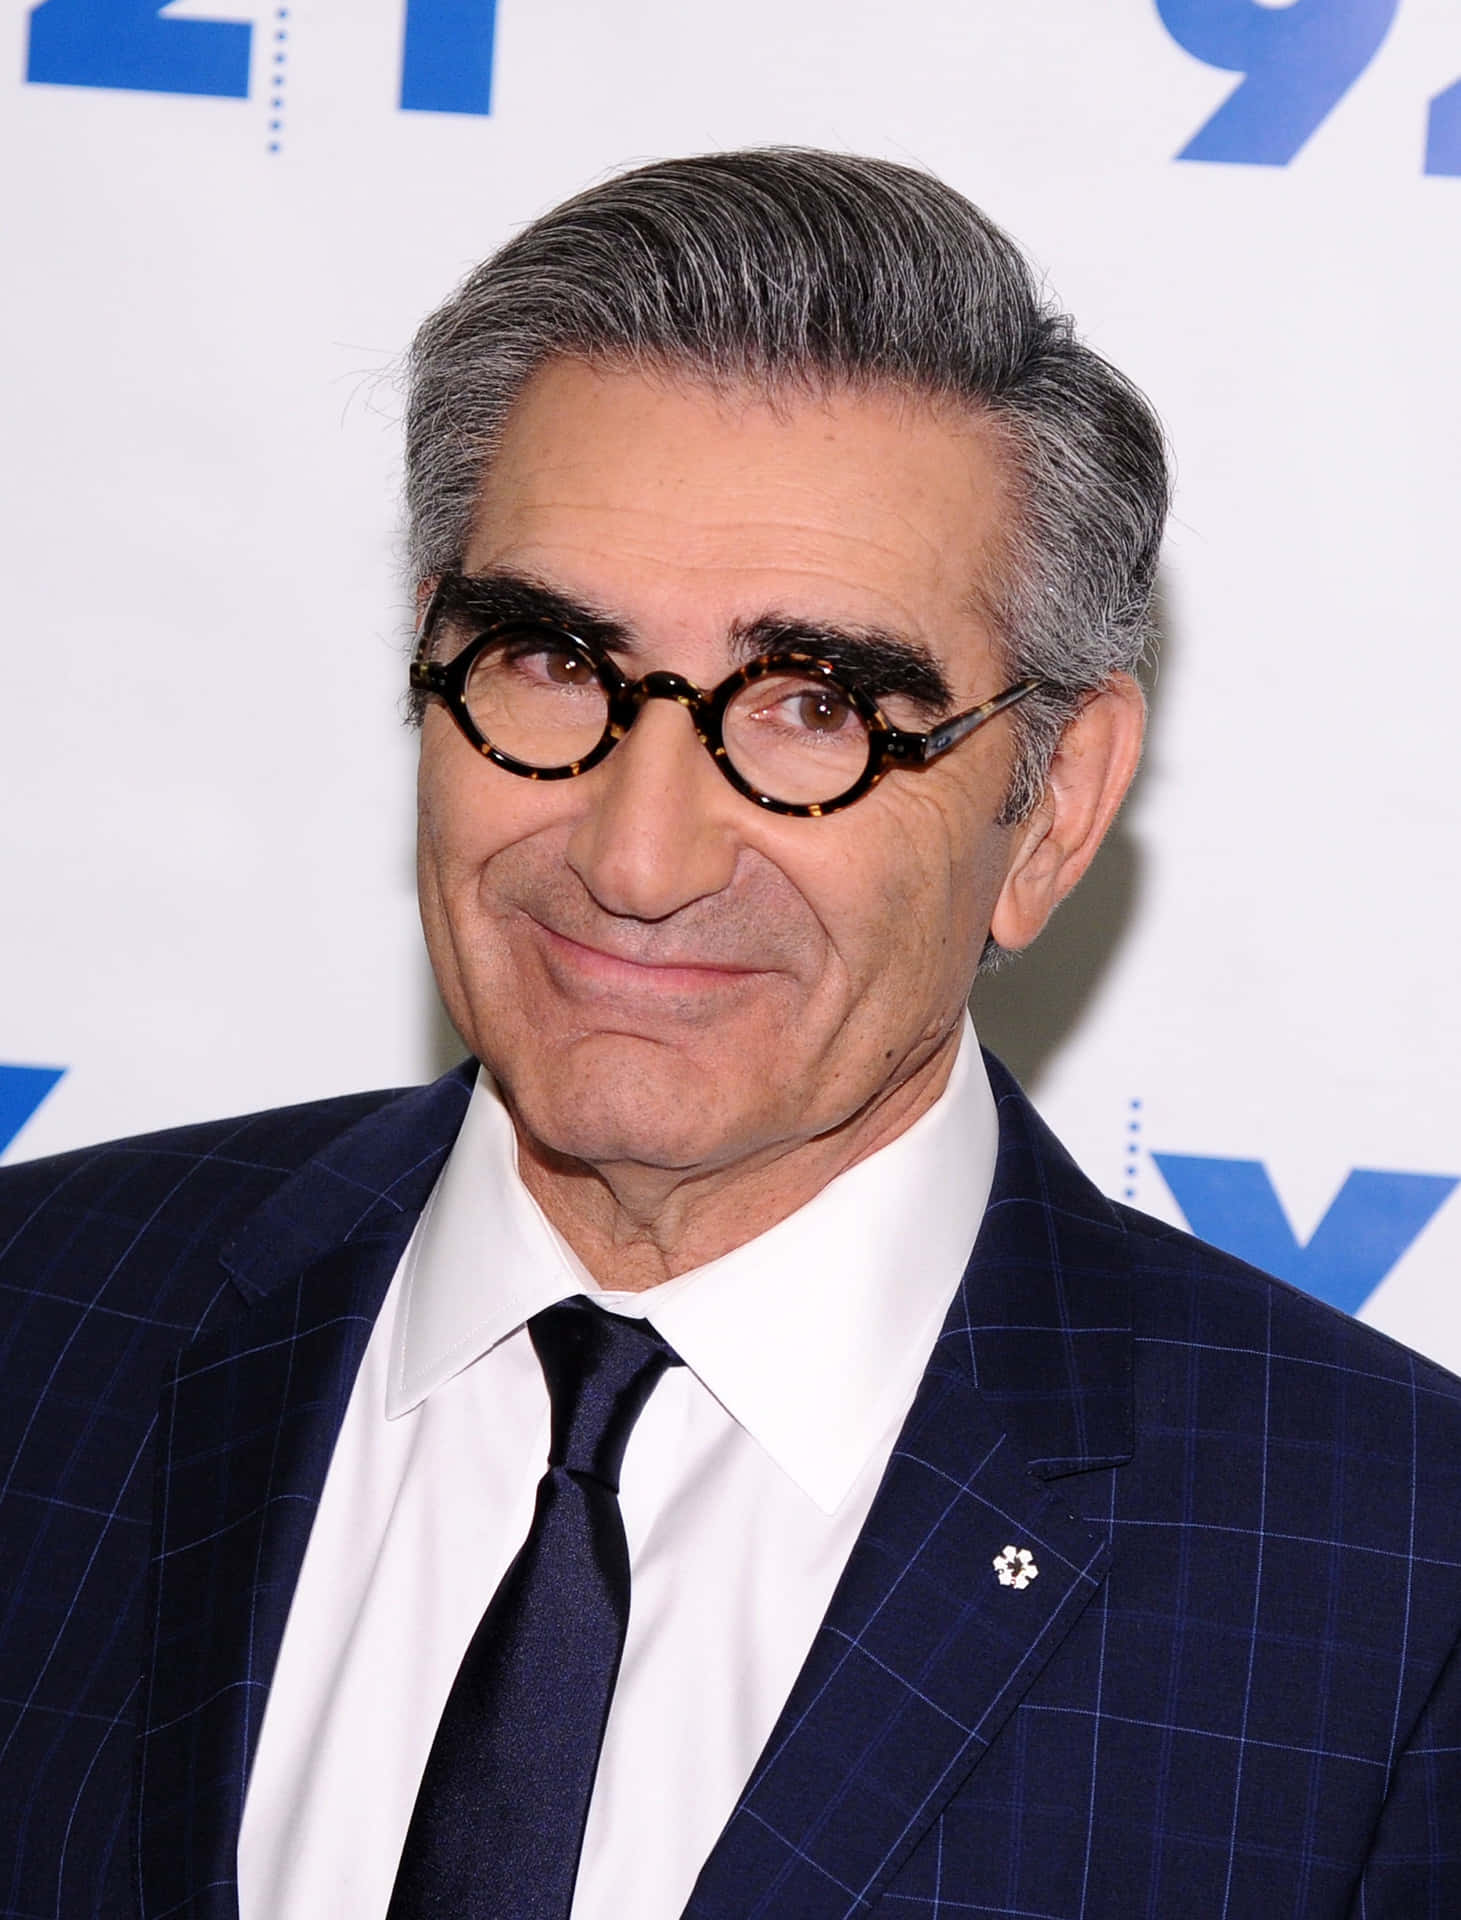 Eugene Levy At The Red Carpet Event Wallpaper